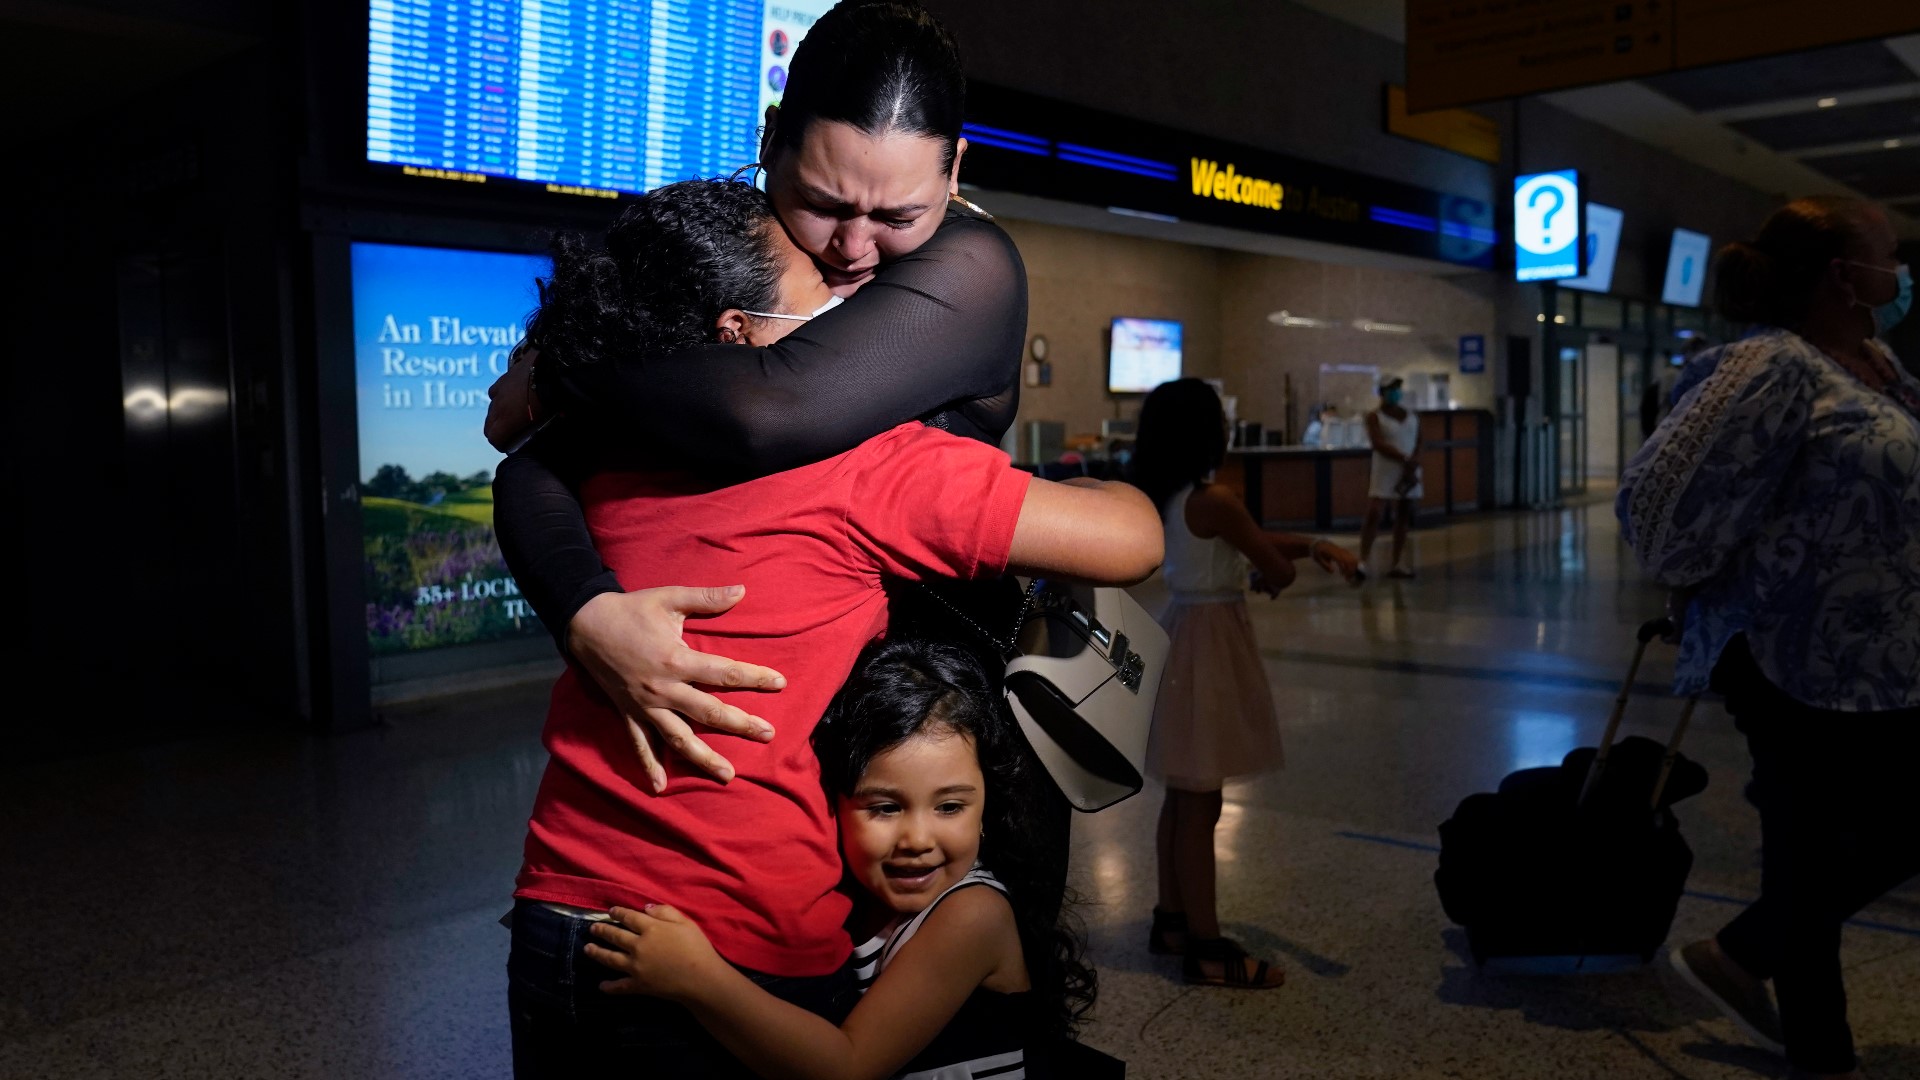 A mother living in America reunited with her daughter on Sunday after seeing a photo of the little girl in a story about children crossing the border alone.